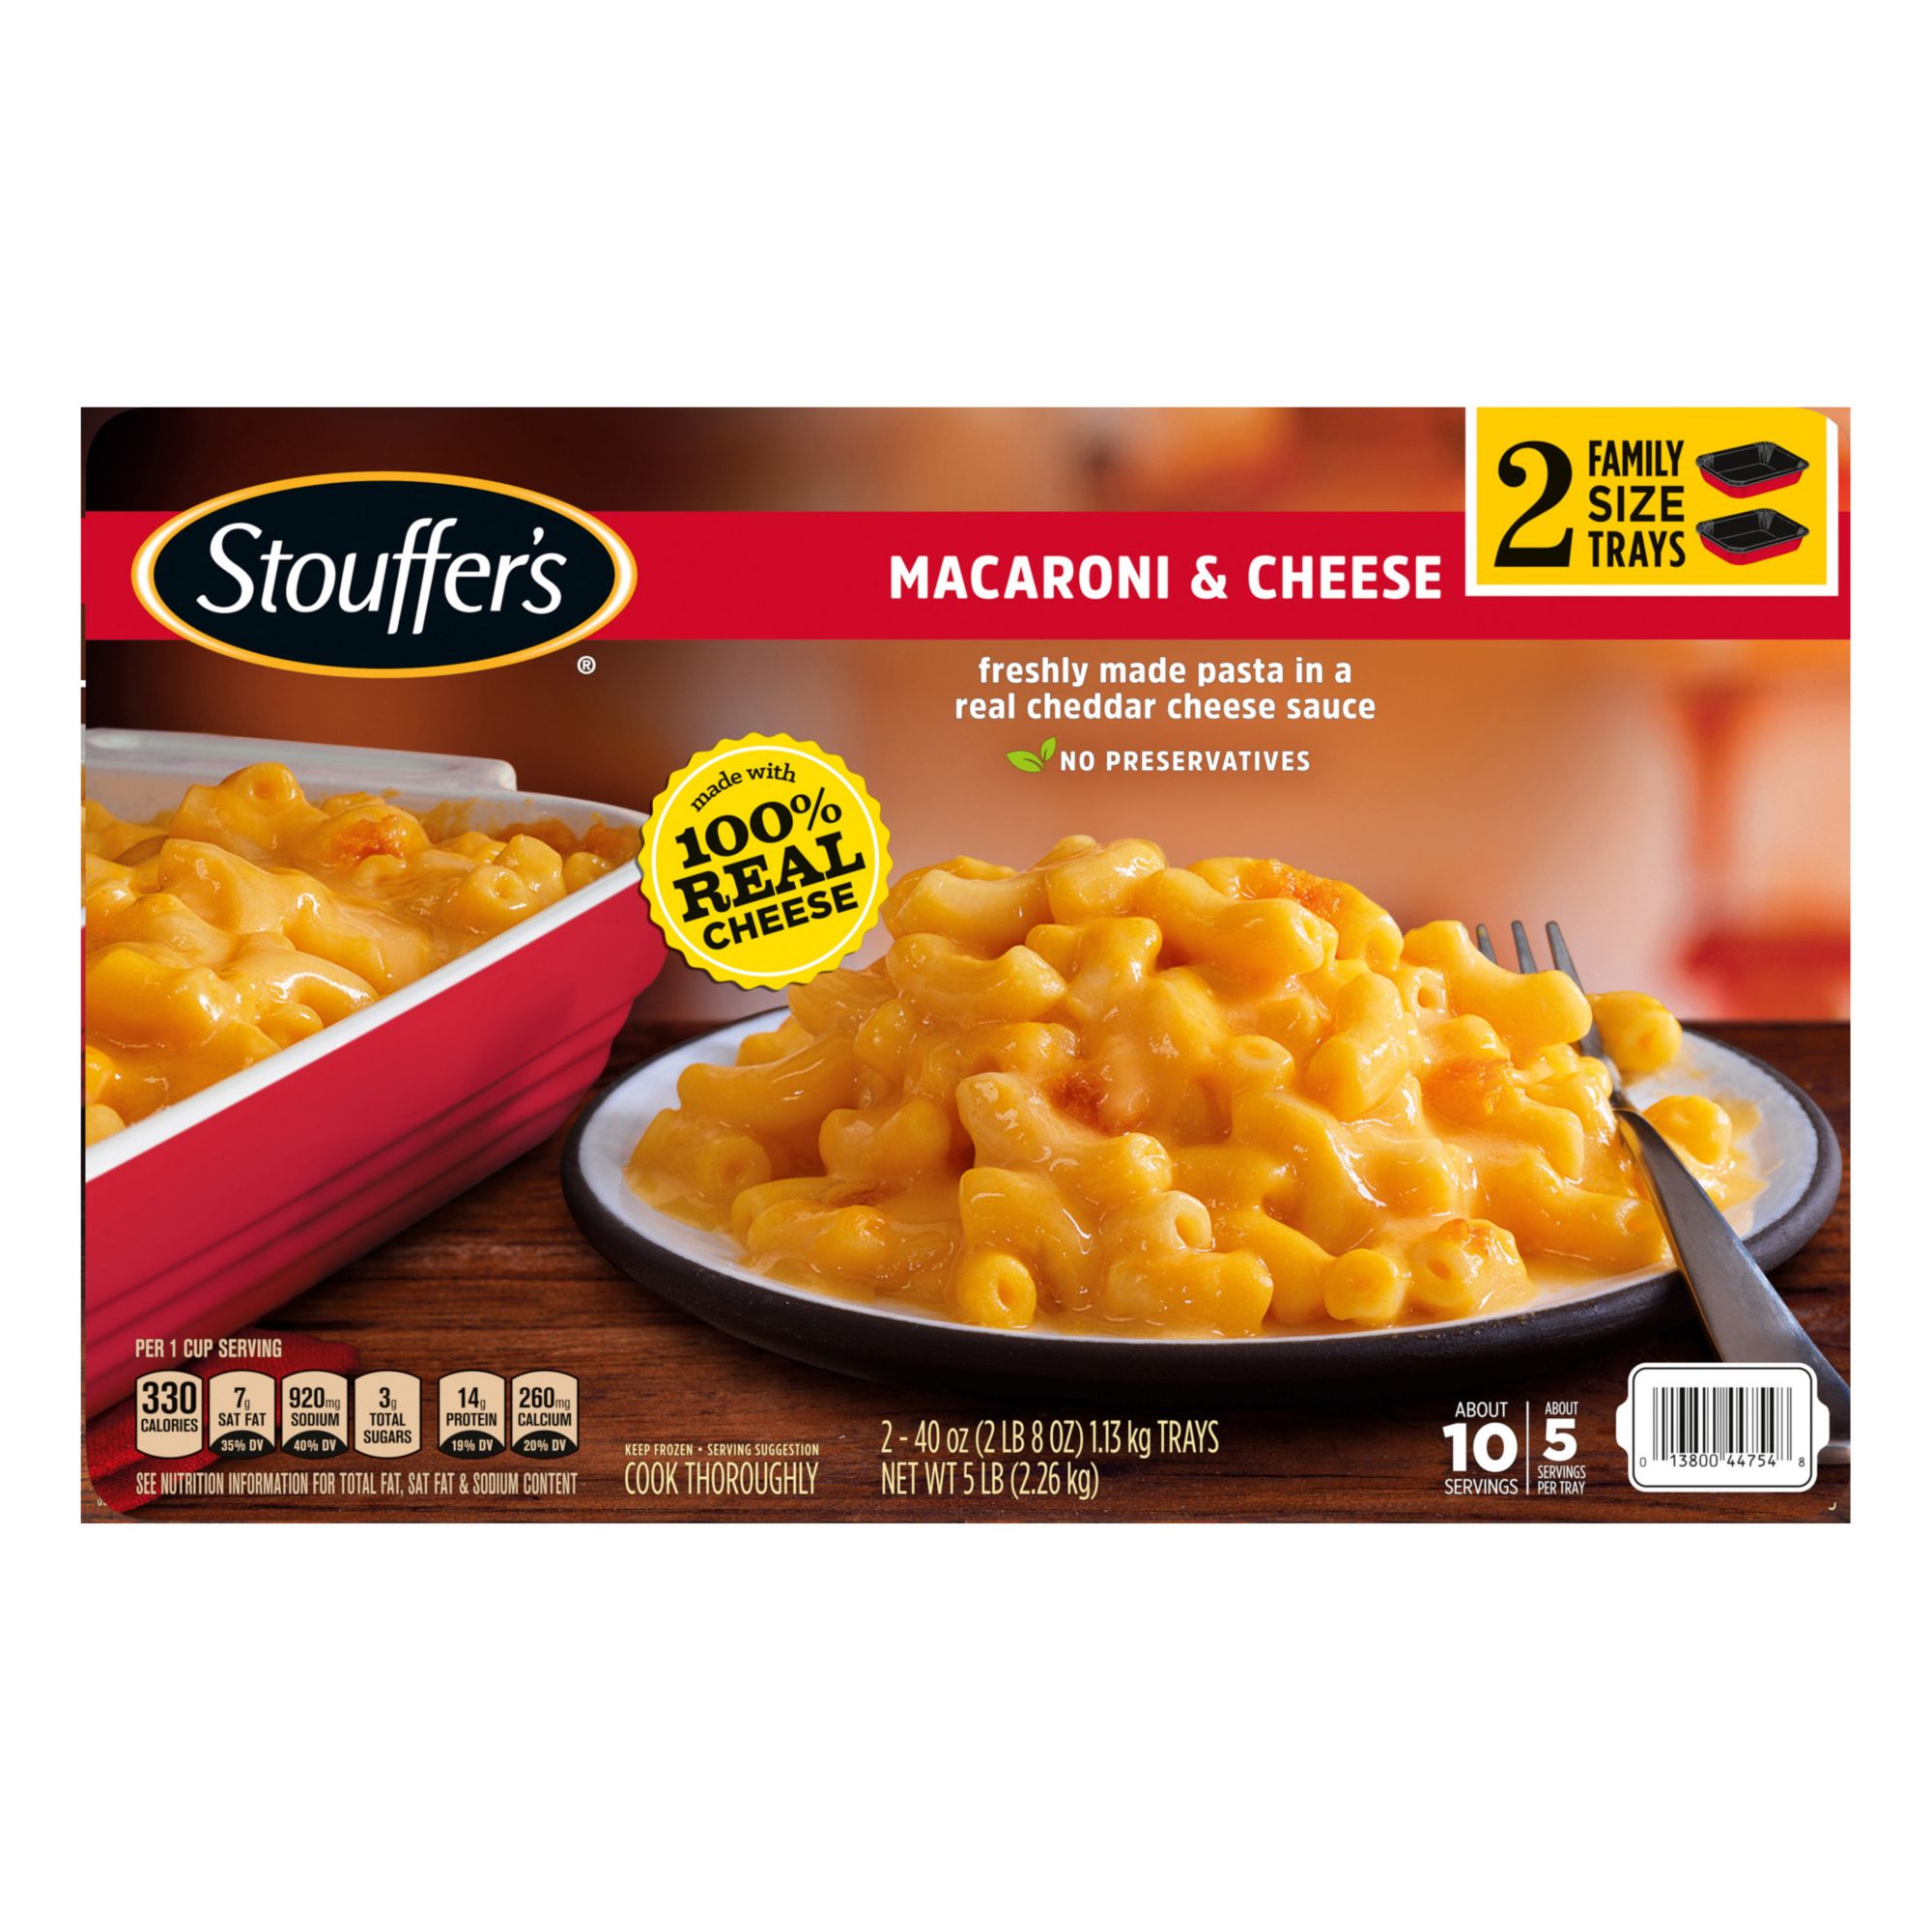 Stouffer's Family Size Macaroni And Cheese Frozen Meal, 80 oz.